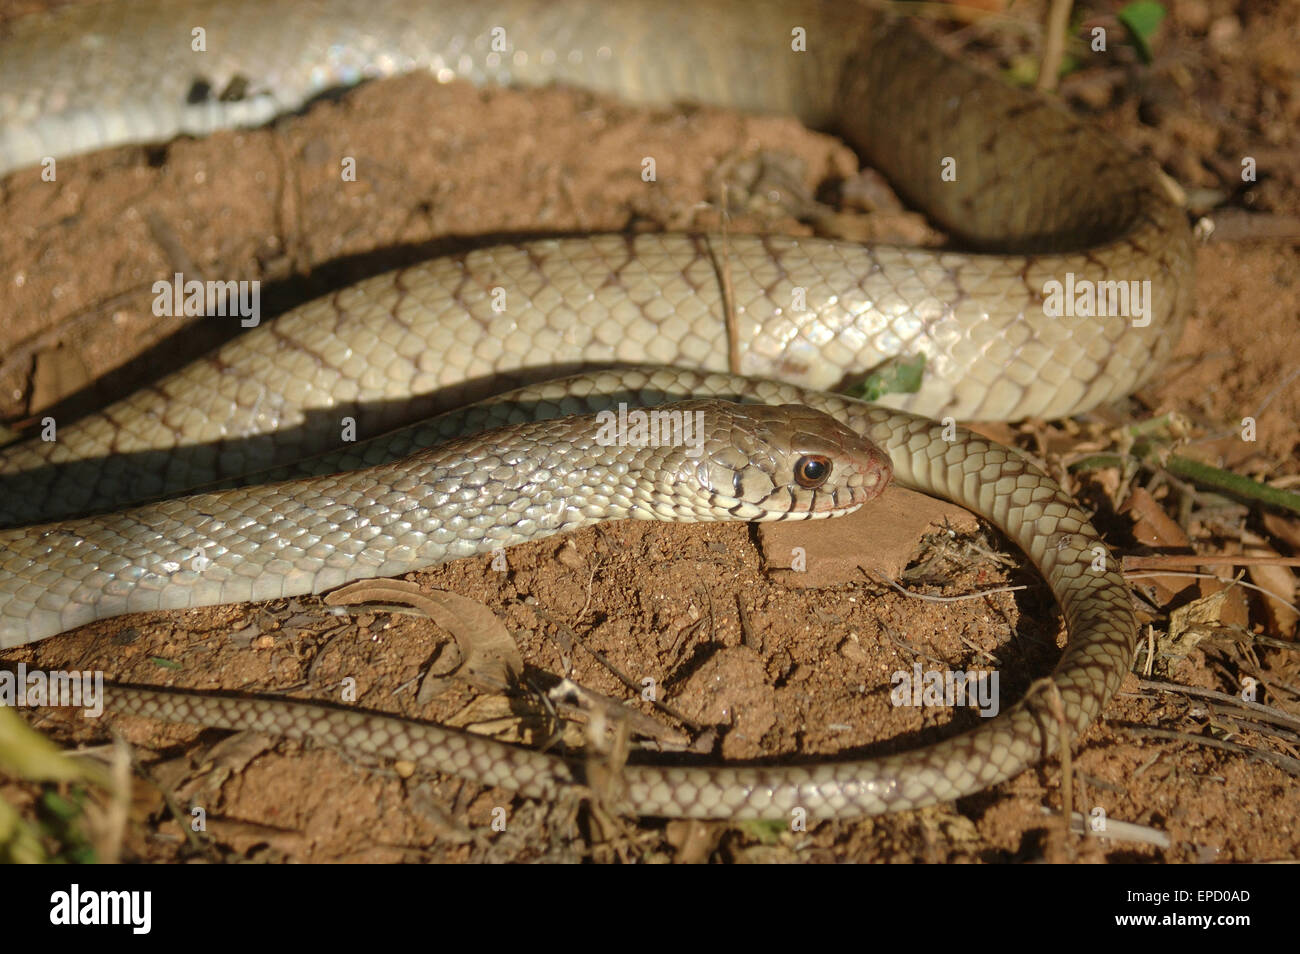 Portrait of unknown snake, Tamil Nadu, South India Stock Photo